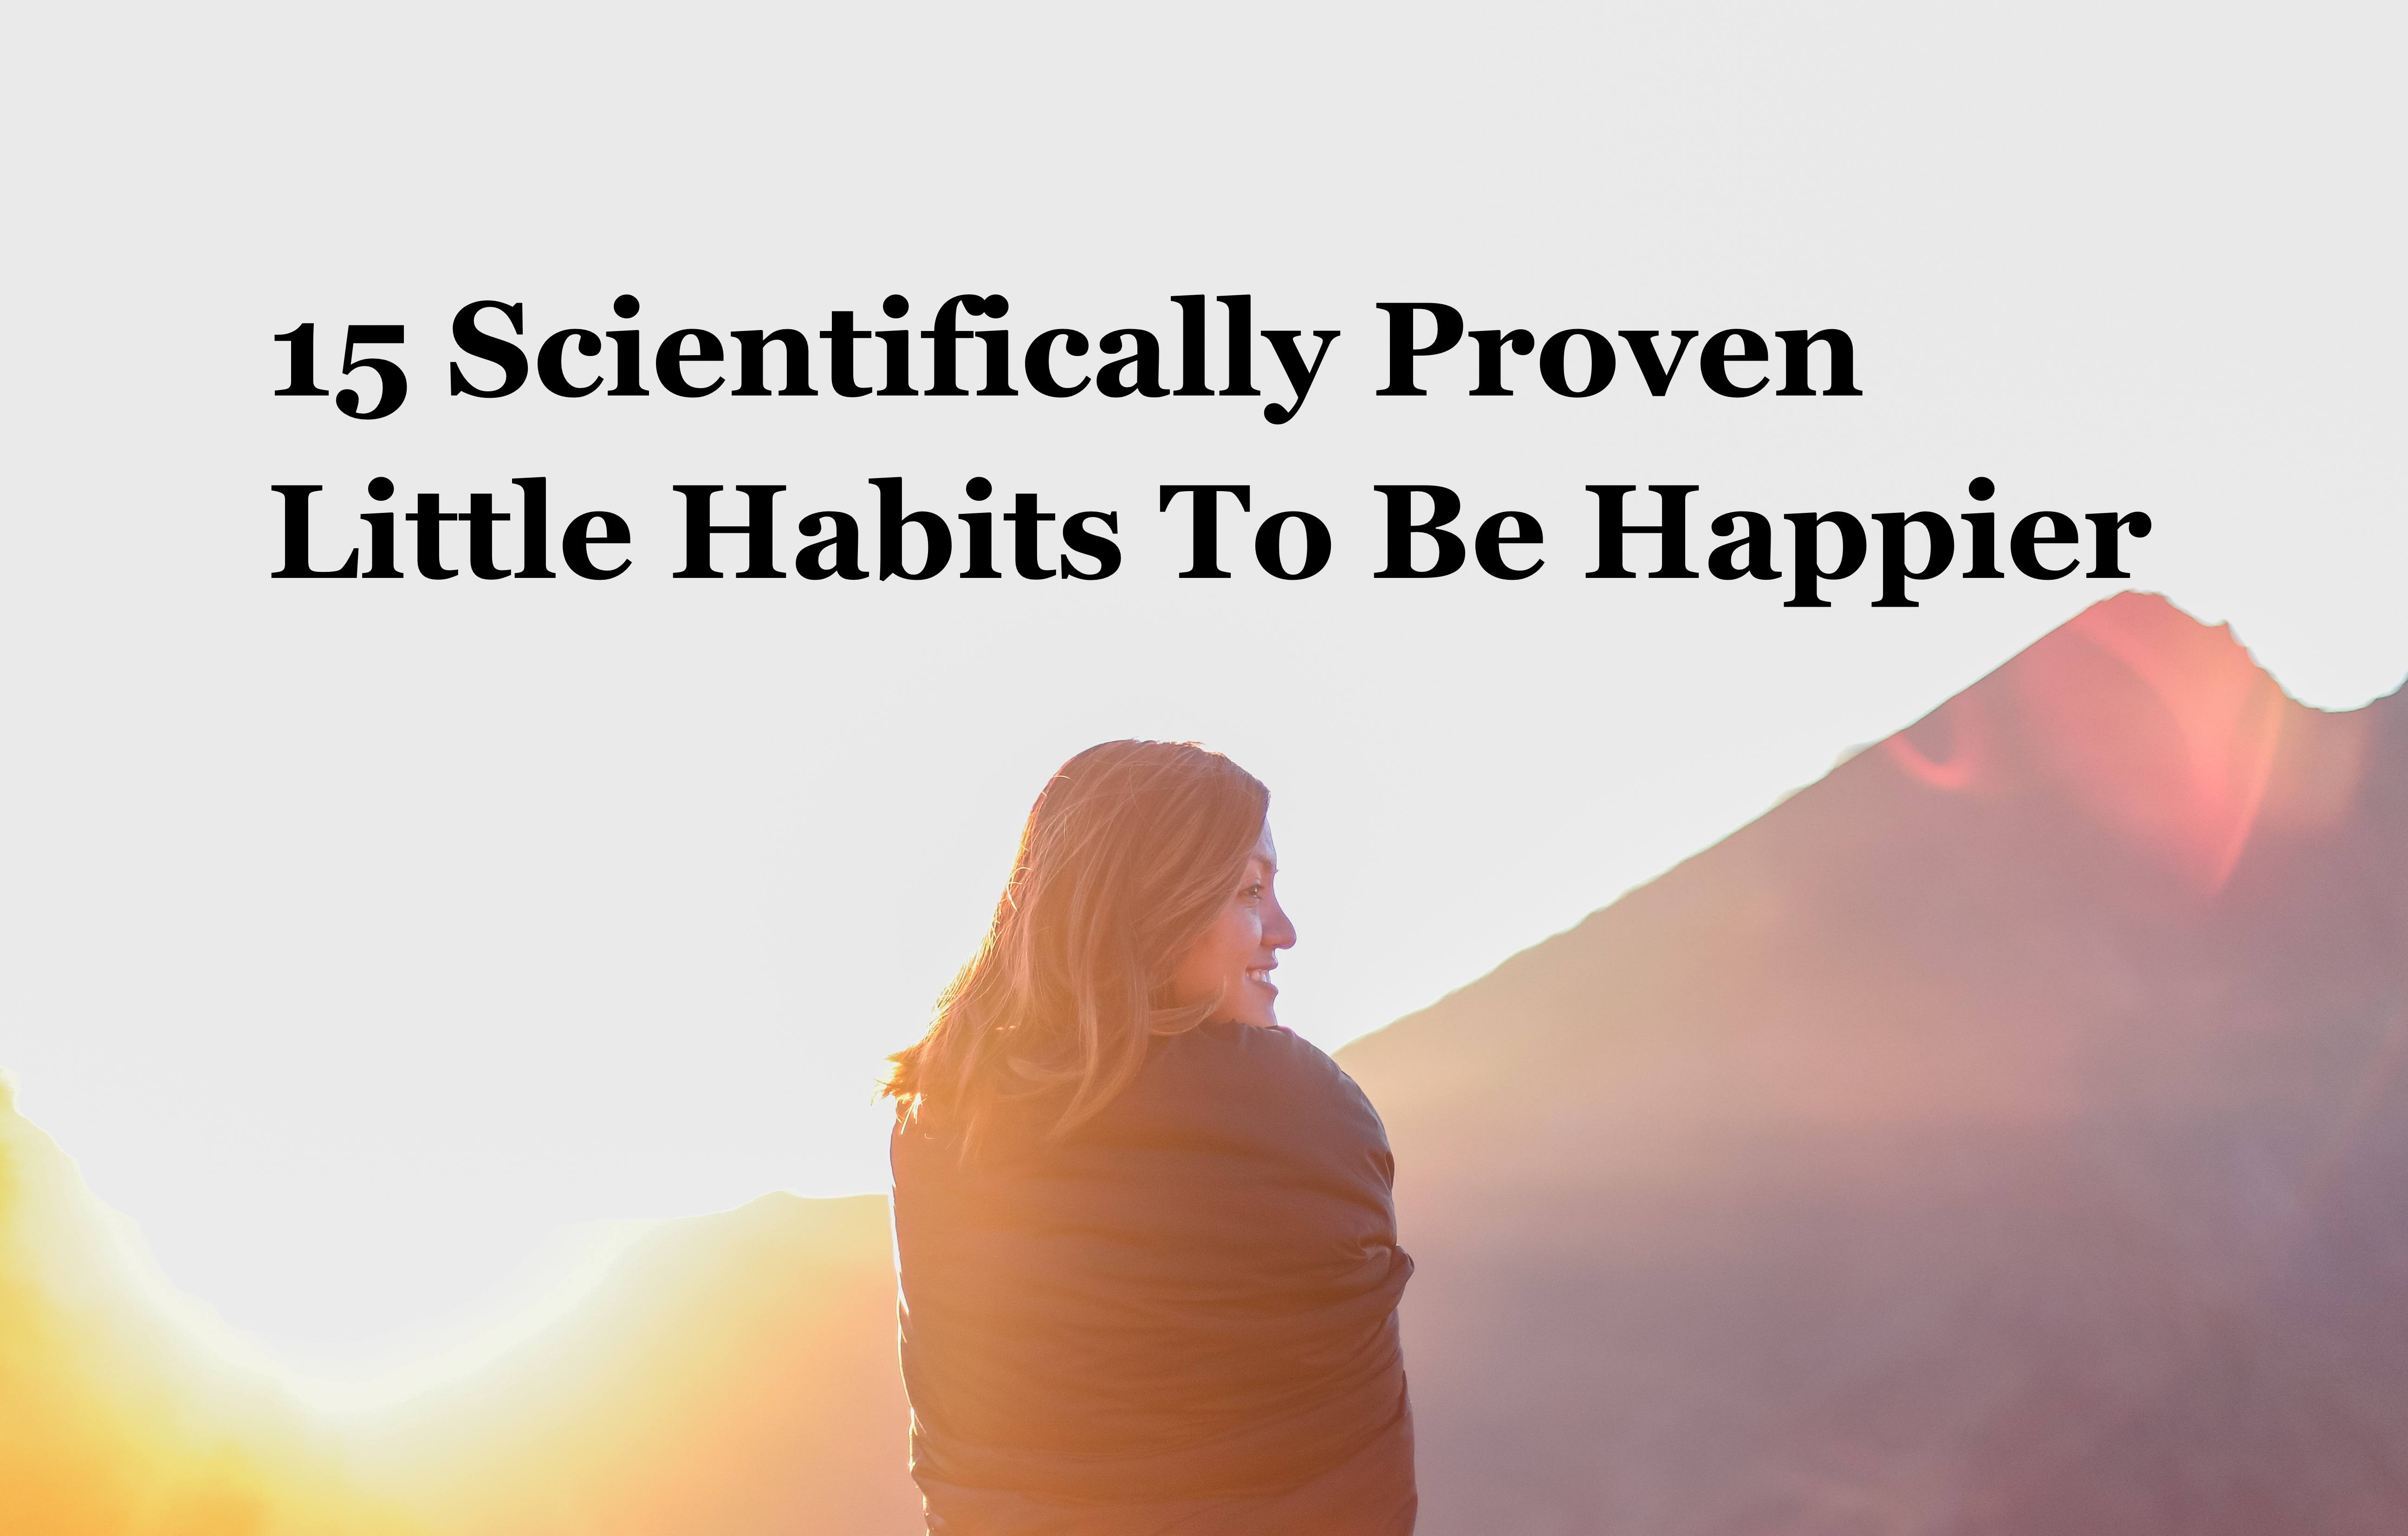 Scientists Reveal 15 Little Habits That Can Lead To A Happier Life